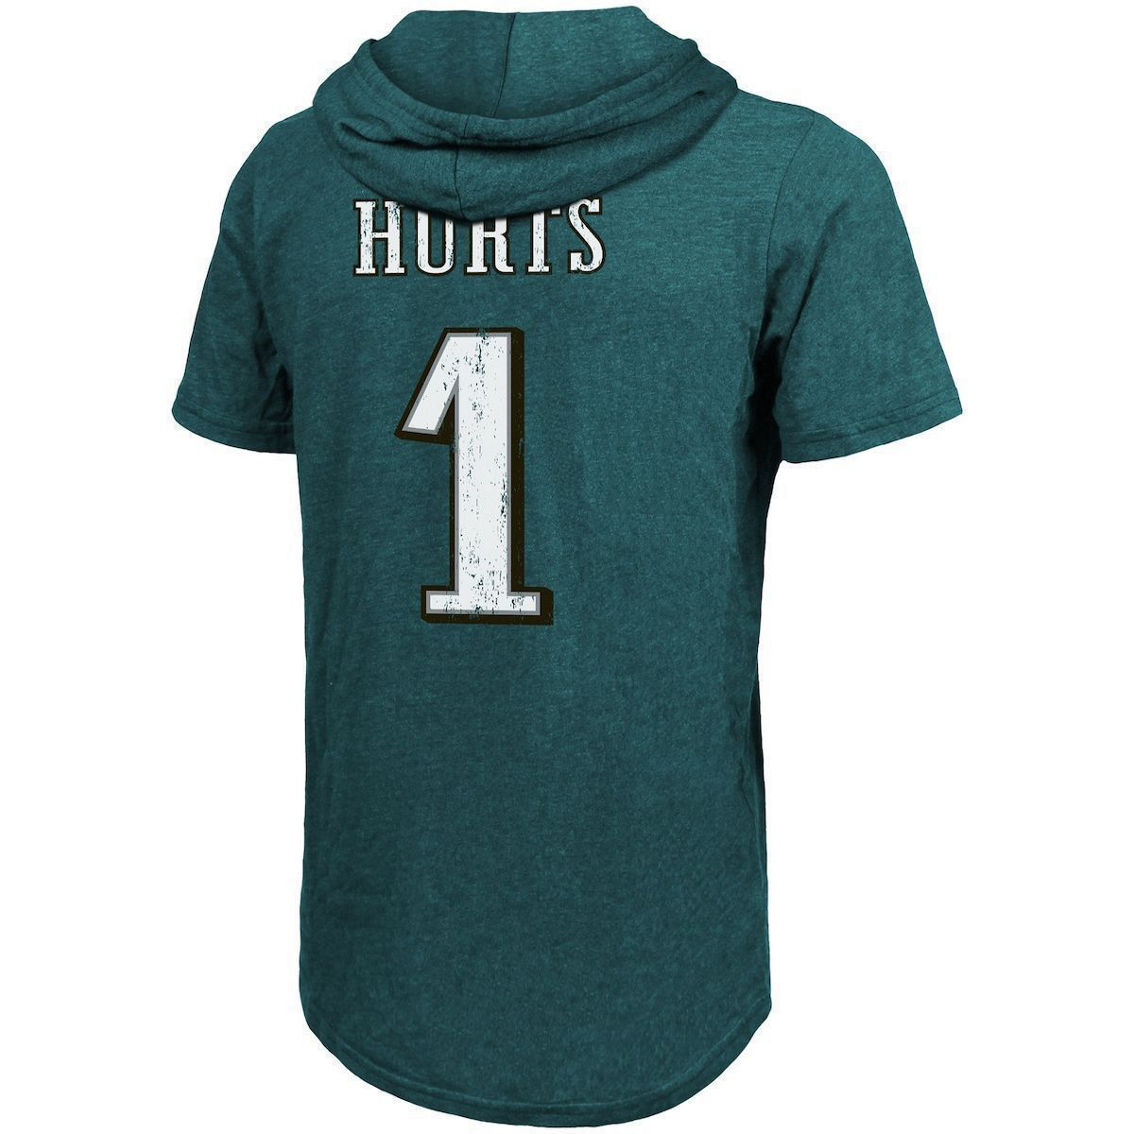 Majestic Threads Men's Threads Jalen Hurts Midnight Green Philadelphia Eagles Player Name & Number Tri-Blend Slim Fit Hoodie T-Shirt - Image 4 of 4